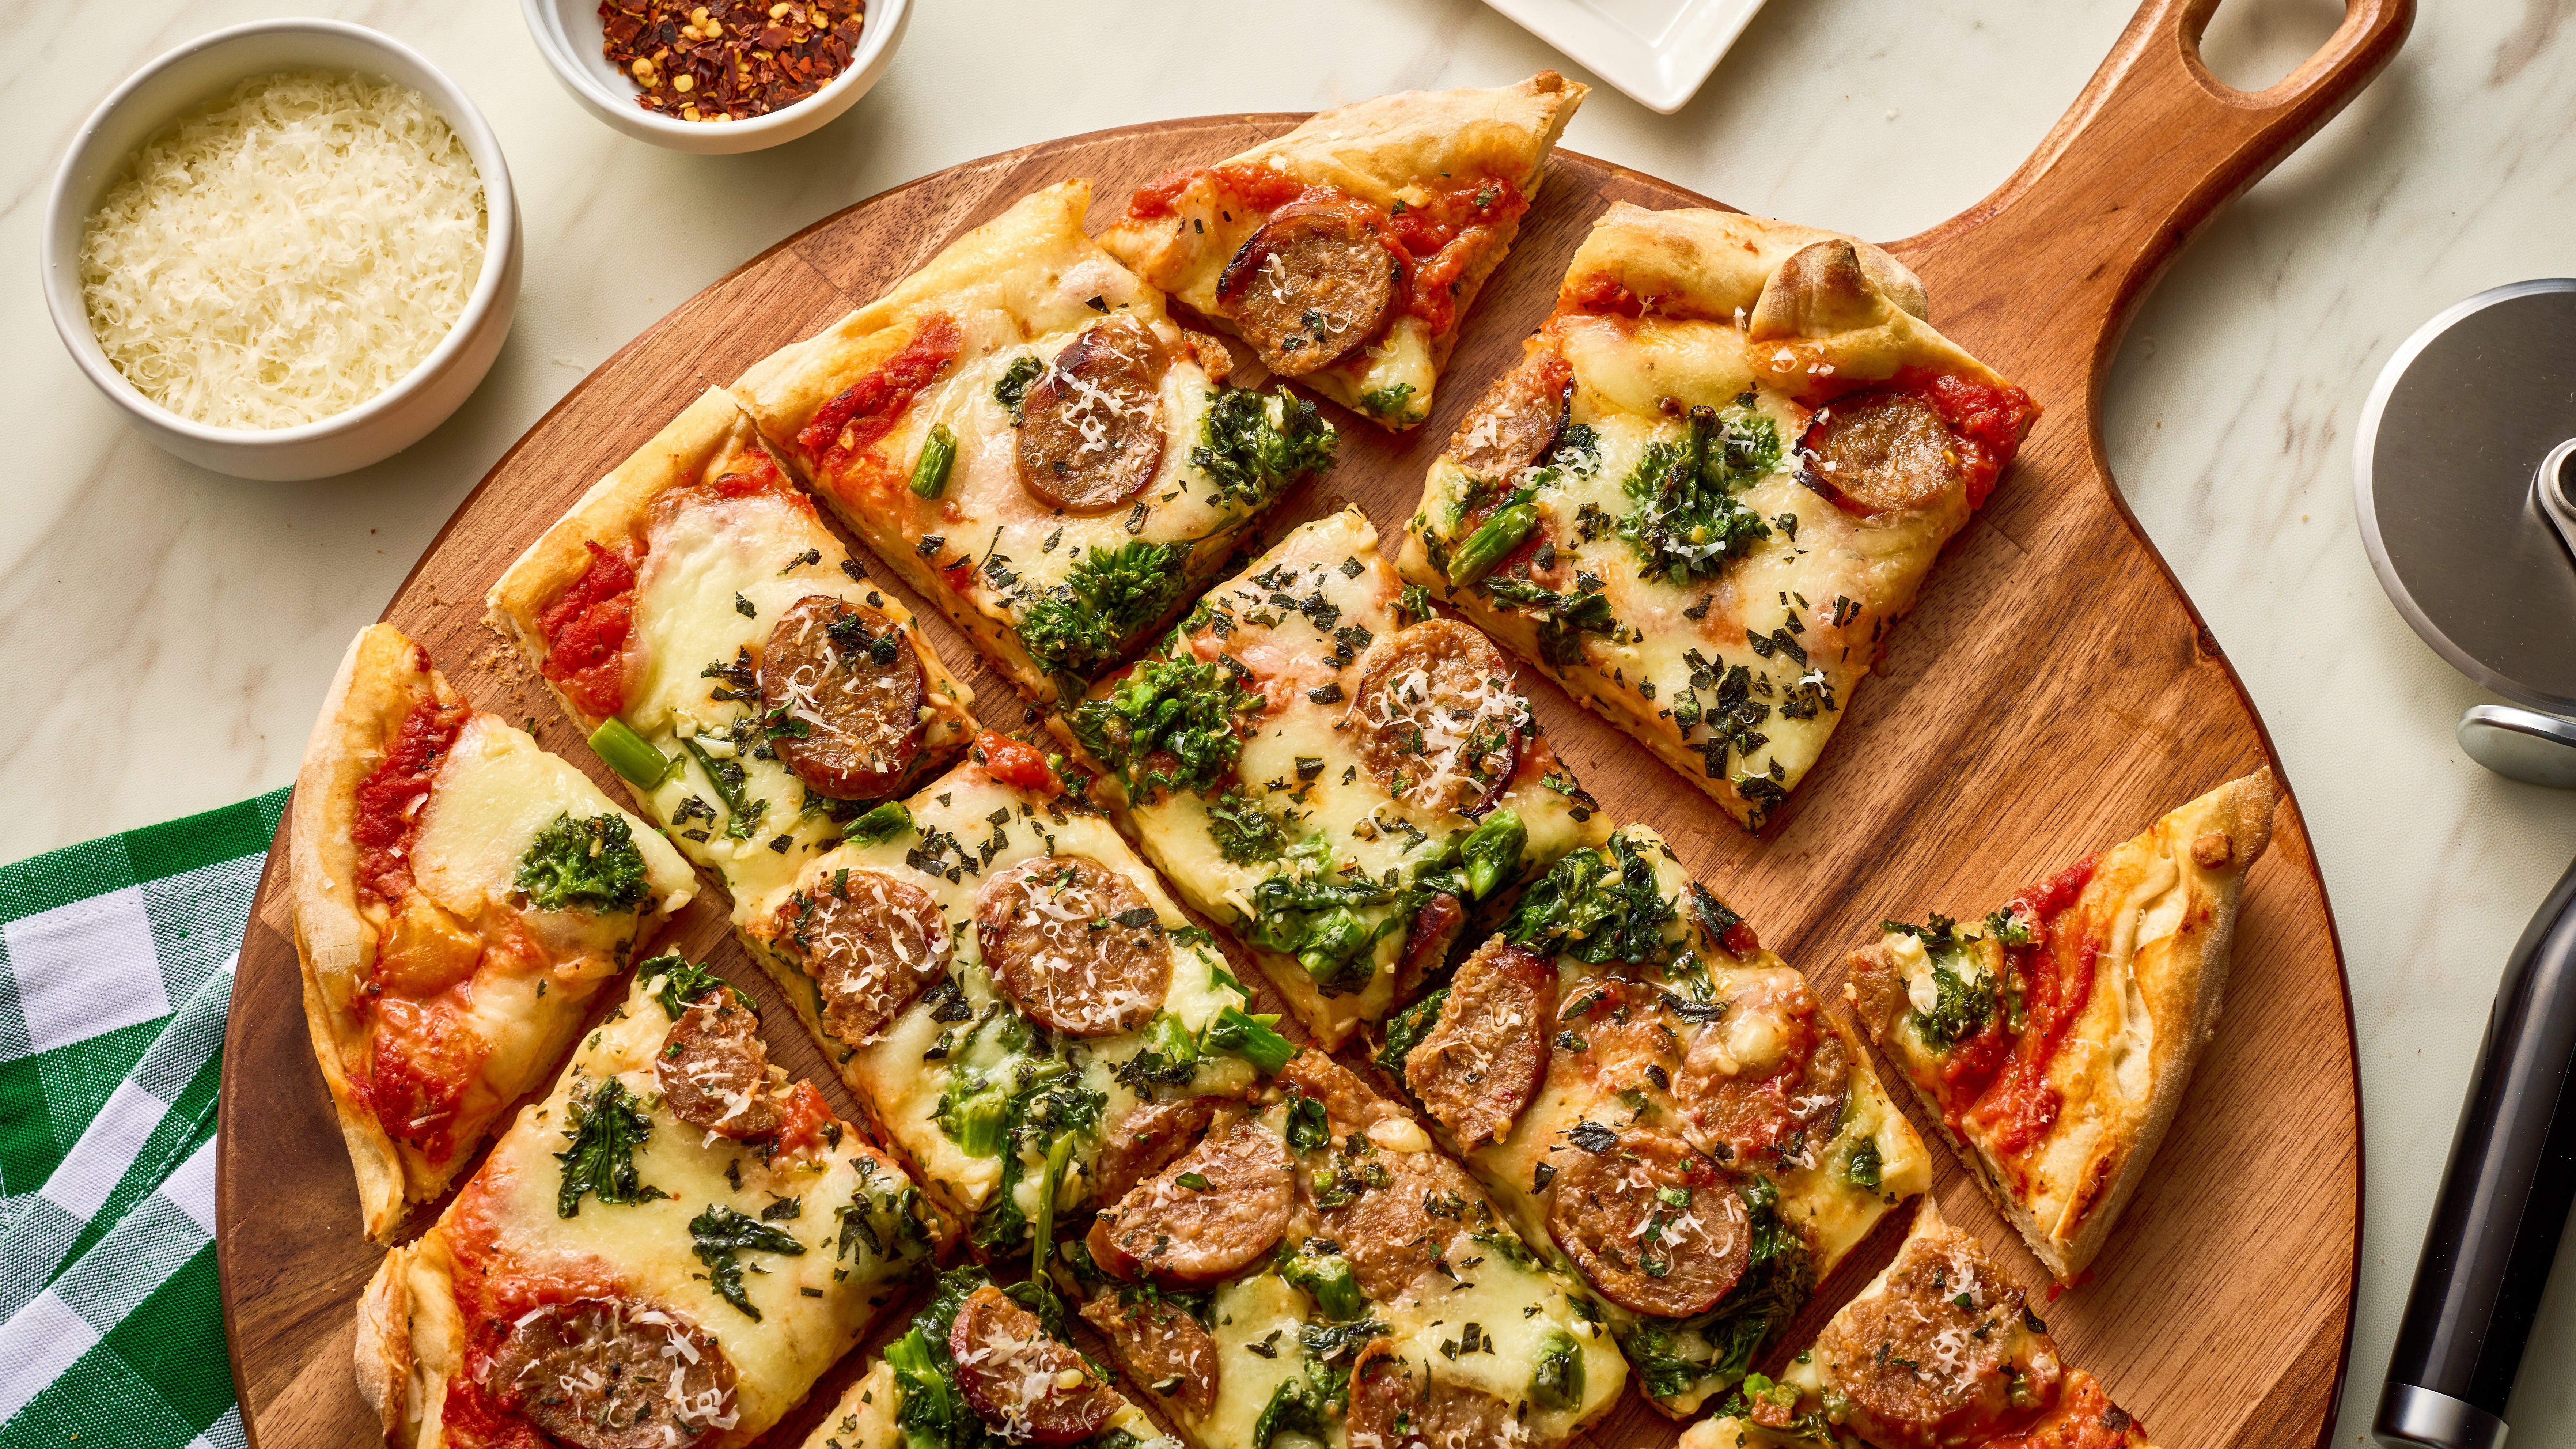  Spicy Sausage and Broccoli Rabe Pizza